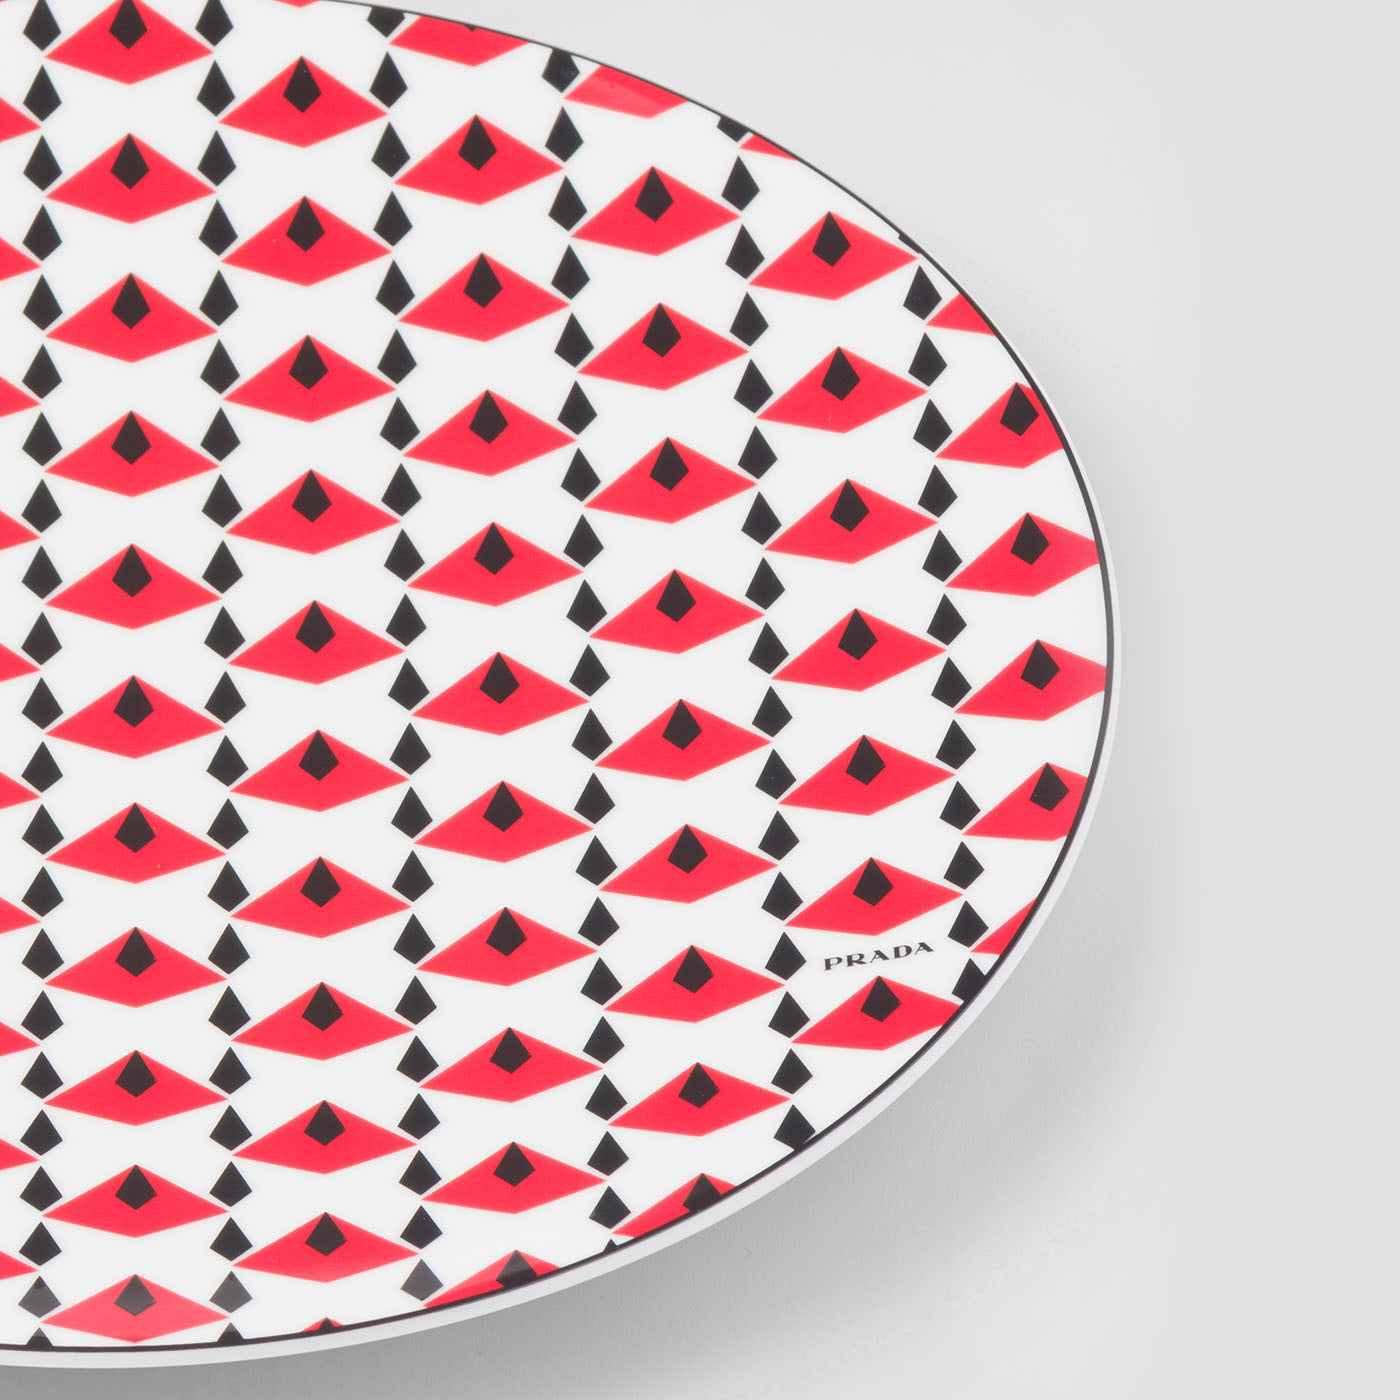 Vienna Red Porcelain Charger Plate - Alternative view 3